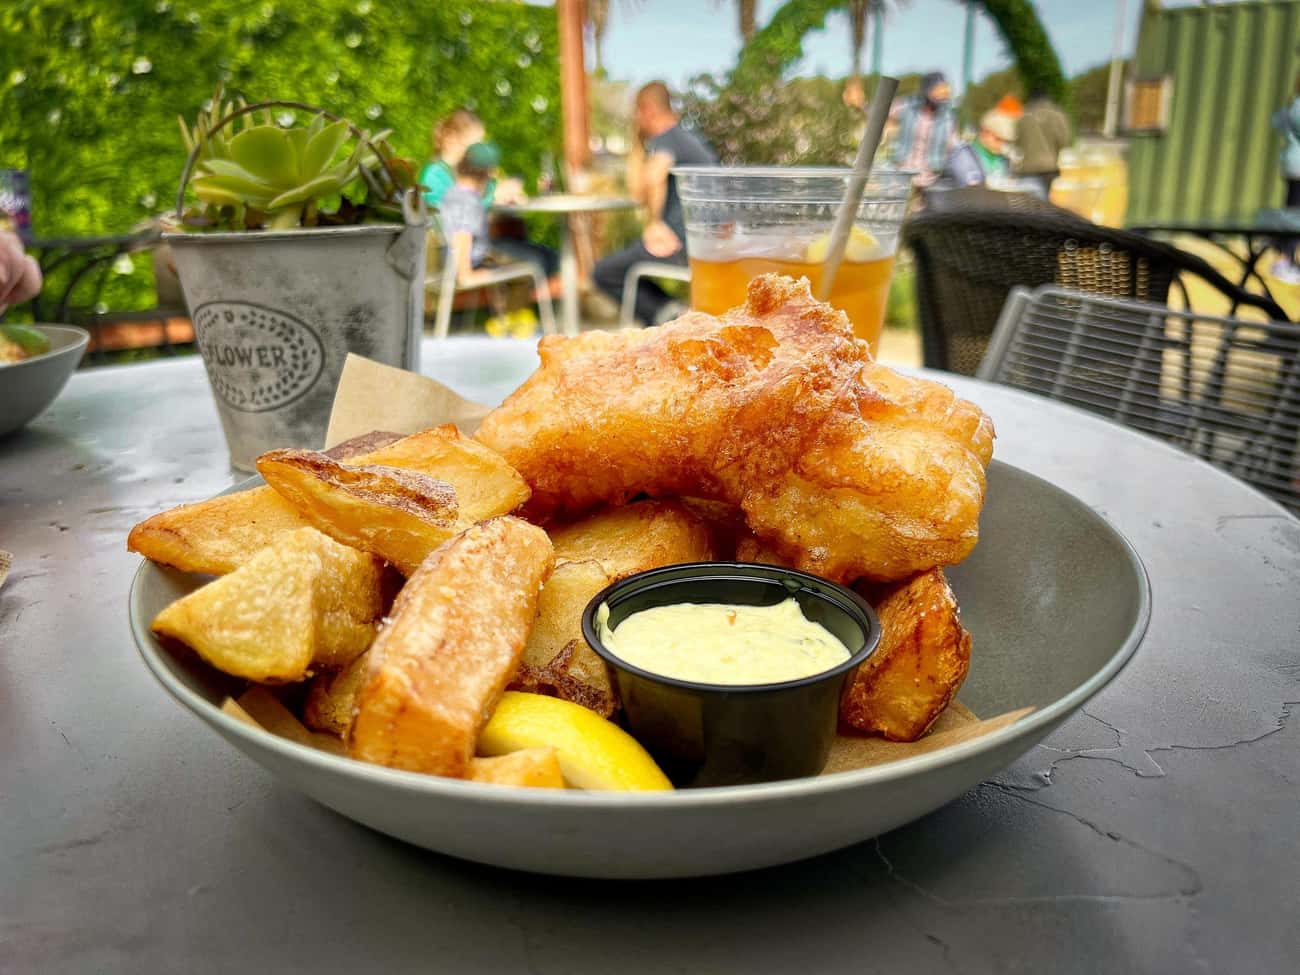 Fish And Chips Come With A Squeeze Of Lemon, Malt Vinegar, And Tartar Sauce